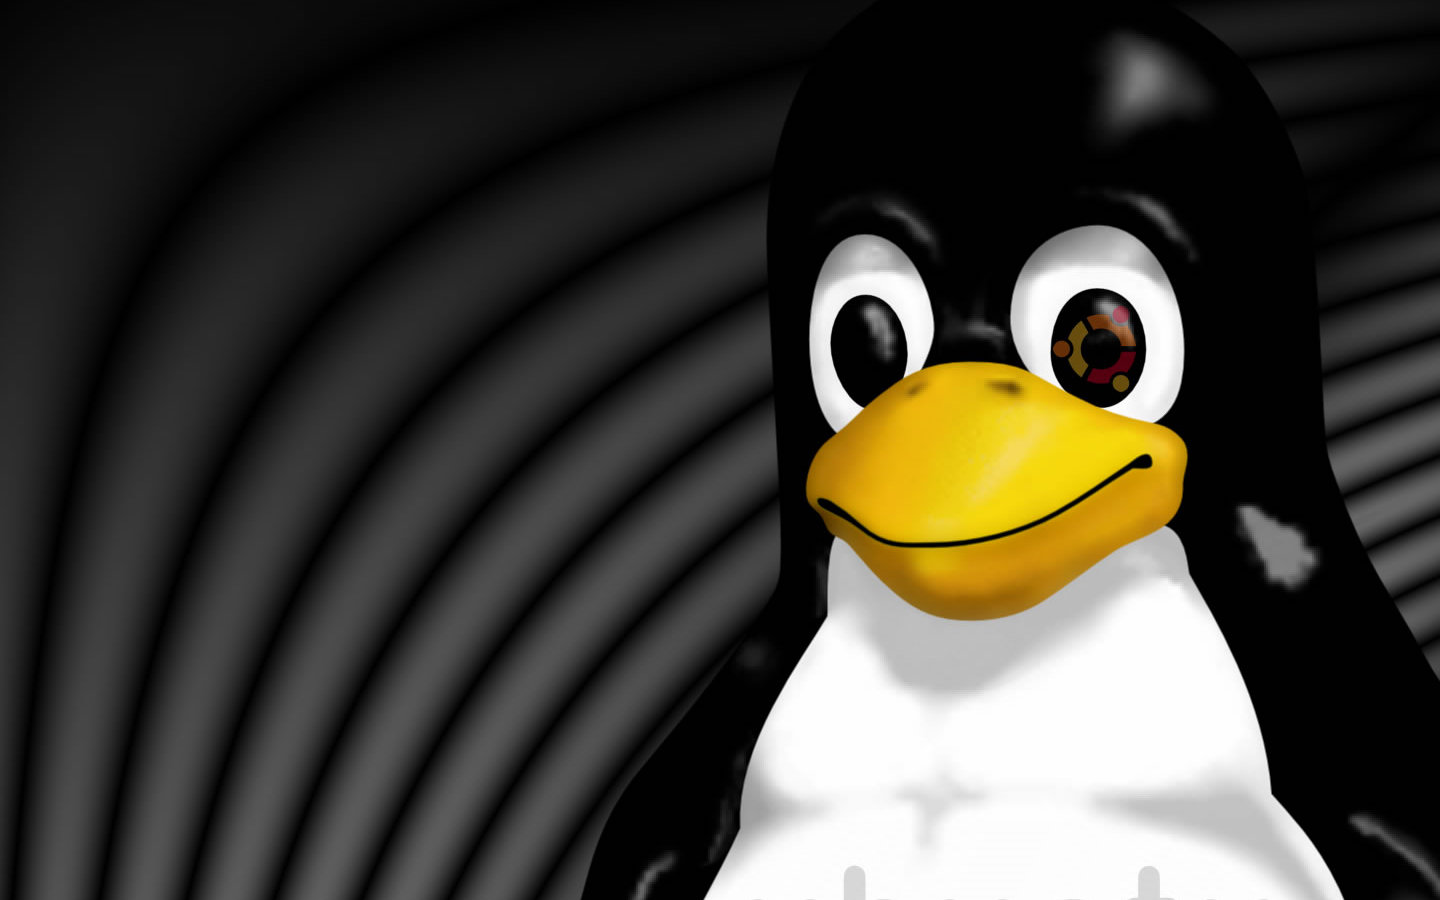 Free Linux Wallpapers Linux Stickers and T Shirts